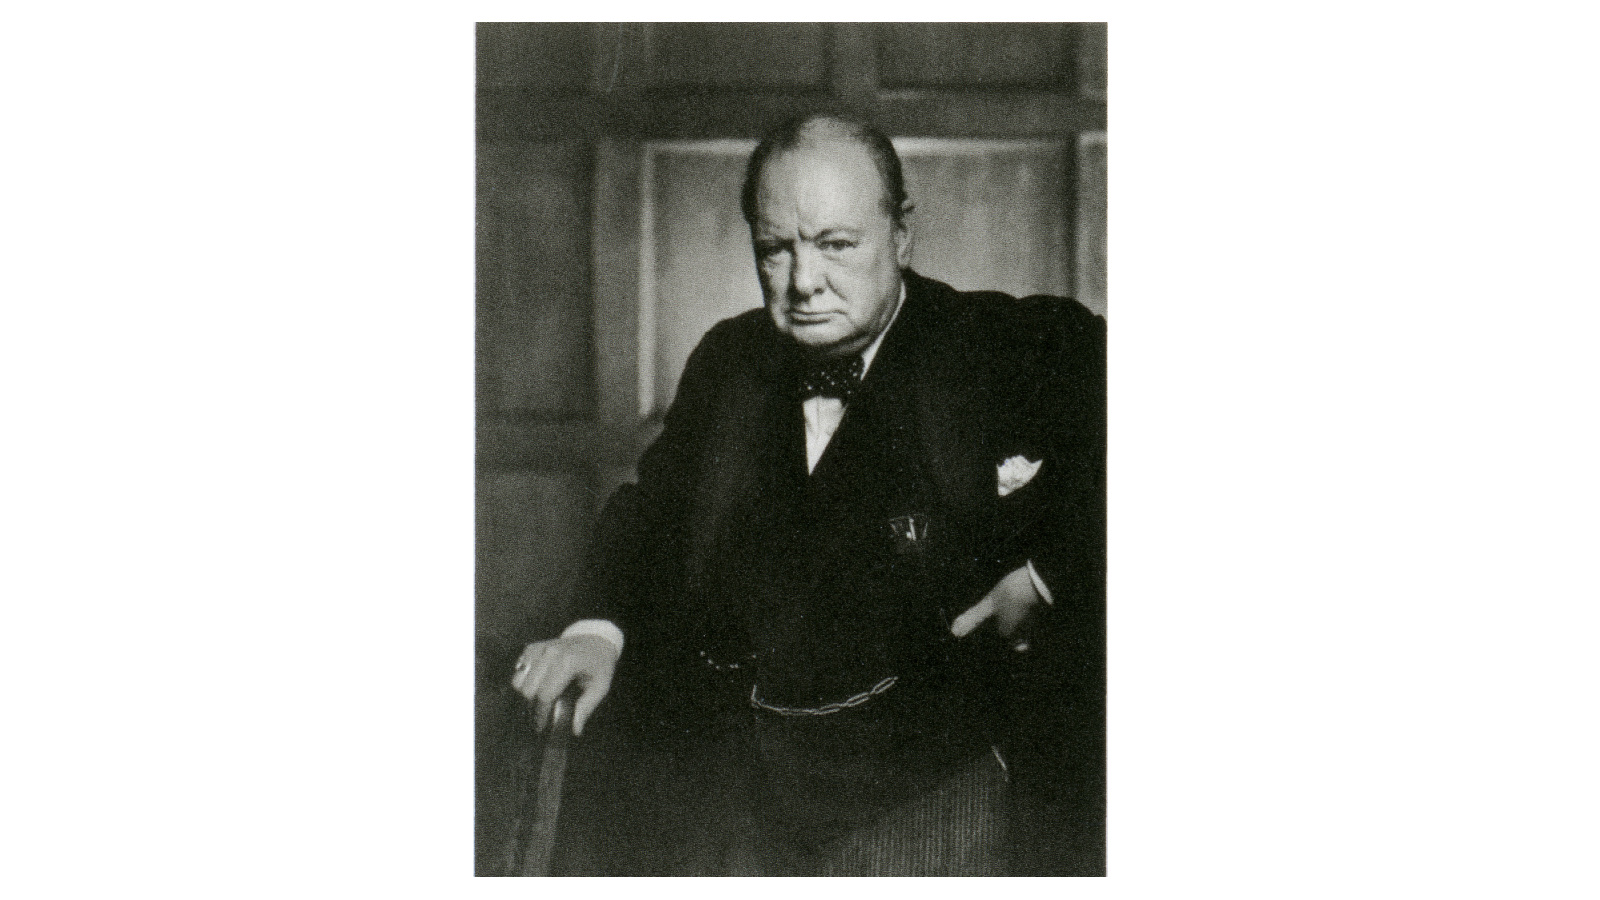 image credit: Olga-Popova/Shutterstock <p><span>During World War II, Winston Churchill delivered this stirring speech to the House of Commons in June 1940. He detailed a grim scenario of the fall of France to Nazi Germany but rallied the British people with a promise of indomitable resistance. The speech is celebrated for its defiant tone and Churchill’s remarkable oratory skills. It encapsulates the spirit of British resilience in the face of adversity.</span></p>